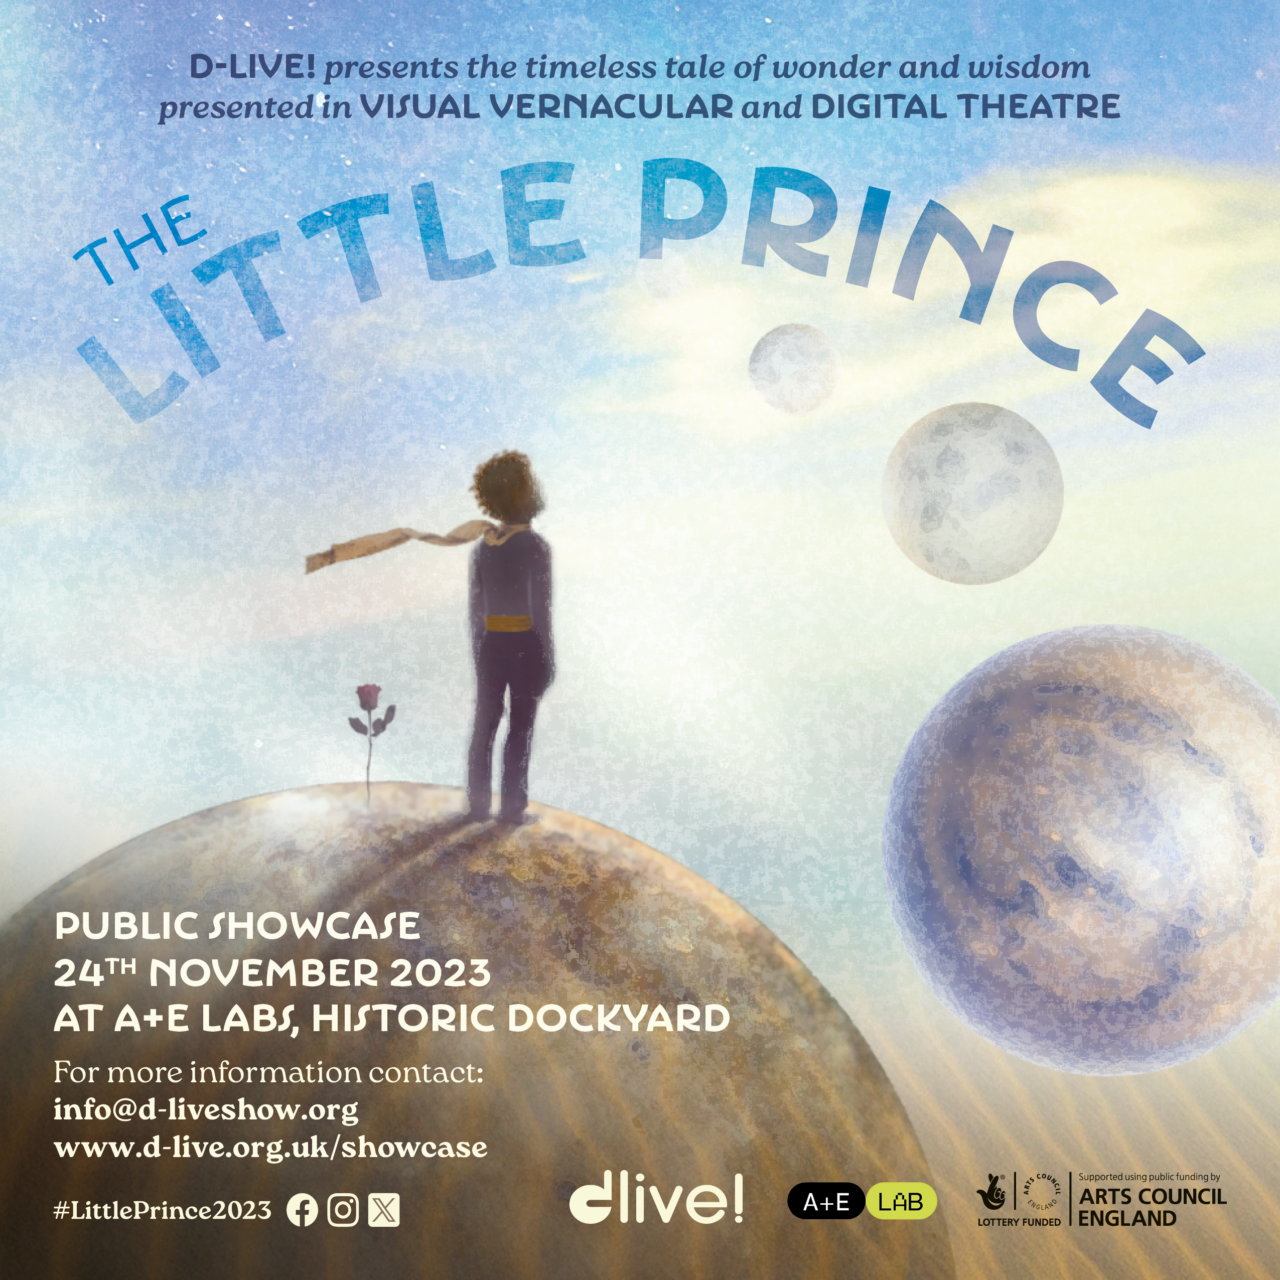 Poster image of Deaf Theatre Company, D-Live!'s new children’s digital live theatre show "The Little Prince”, Little prince standing on top of a planet next to a rose that is grown on the ground looking into 3 planets in front of him.